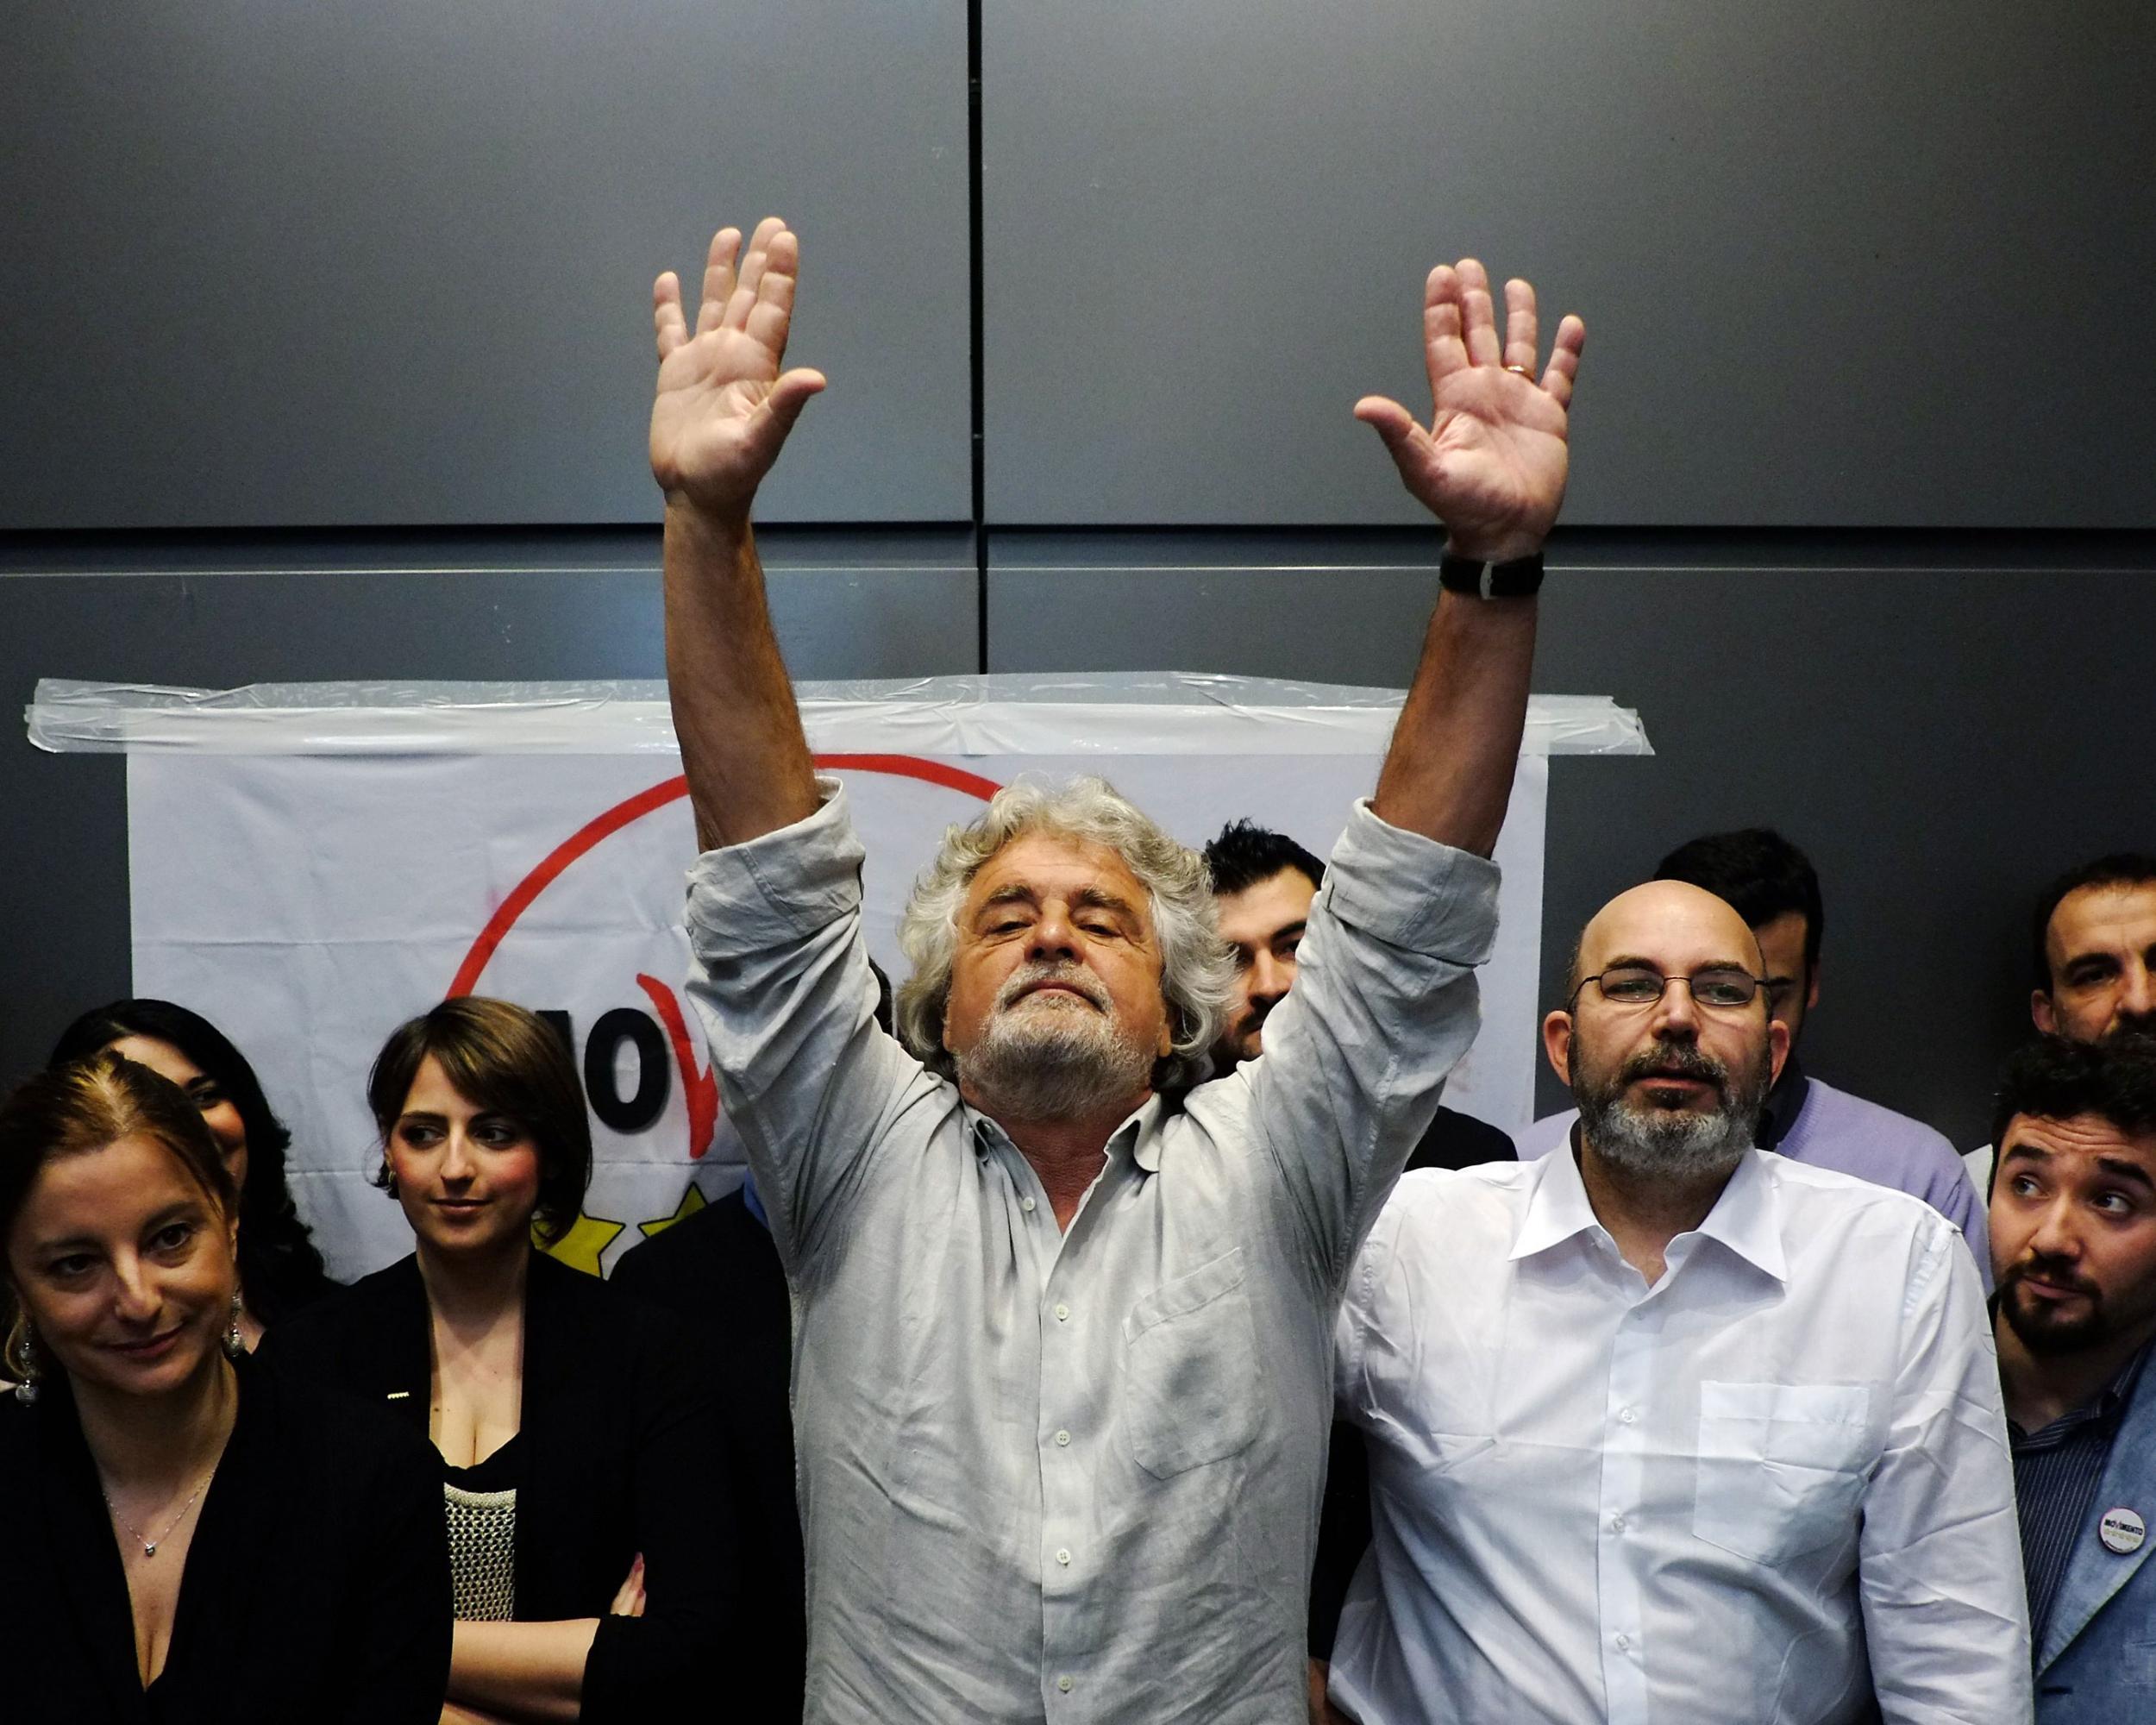 Five Star Movement founder comedian Beppe Grillo